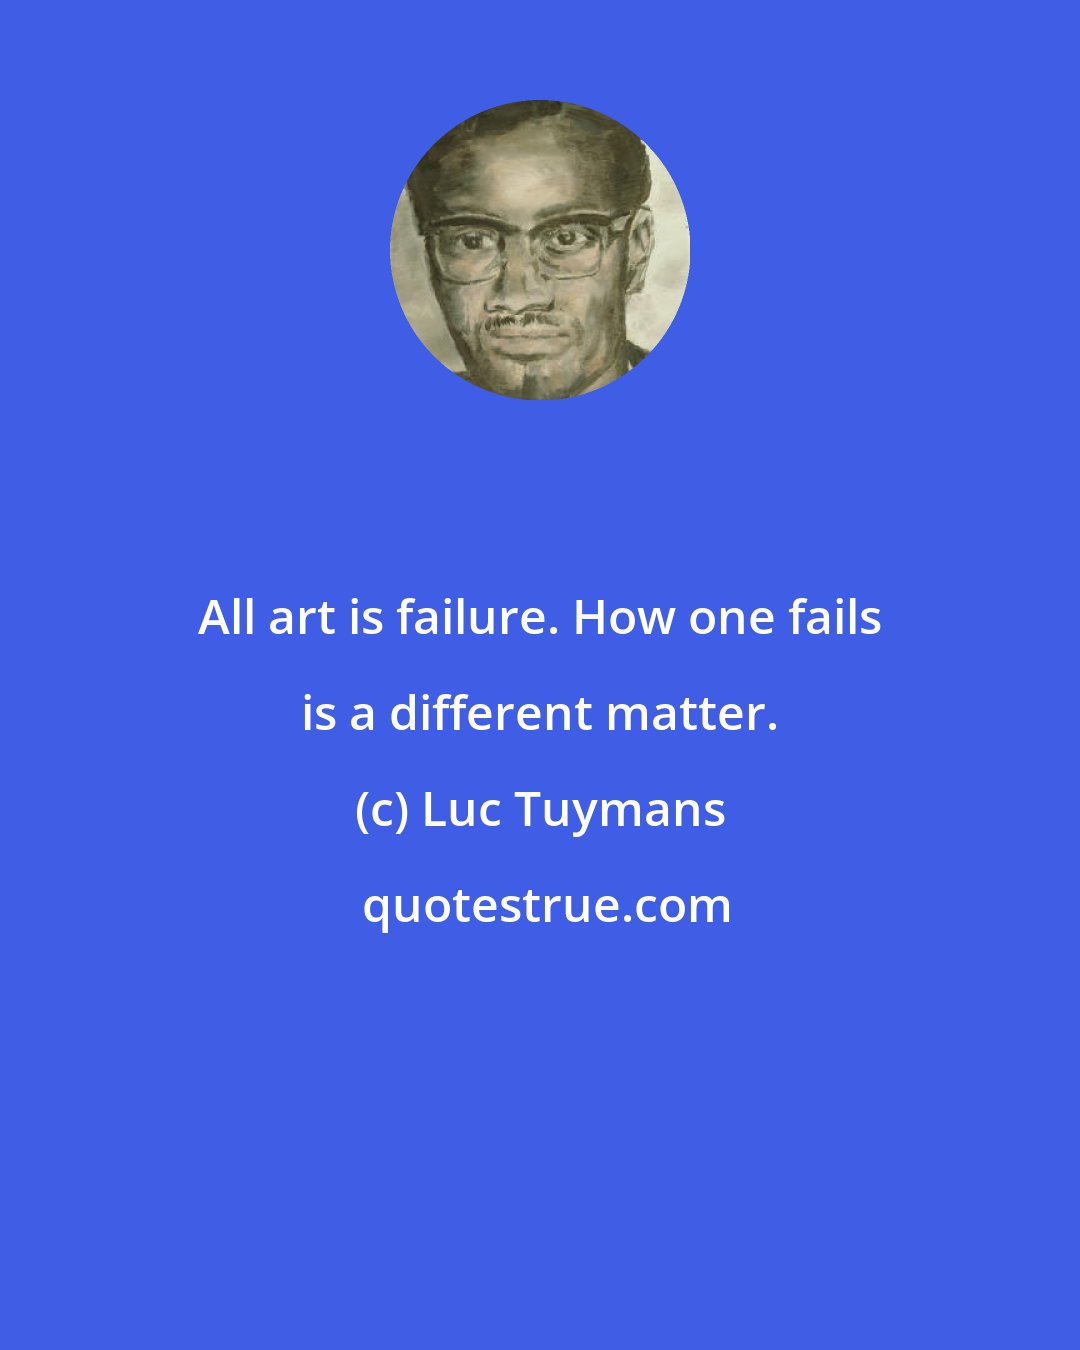 Luc Tuymans: All art is failure. How one fails is a different matter.